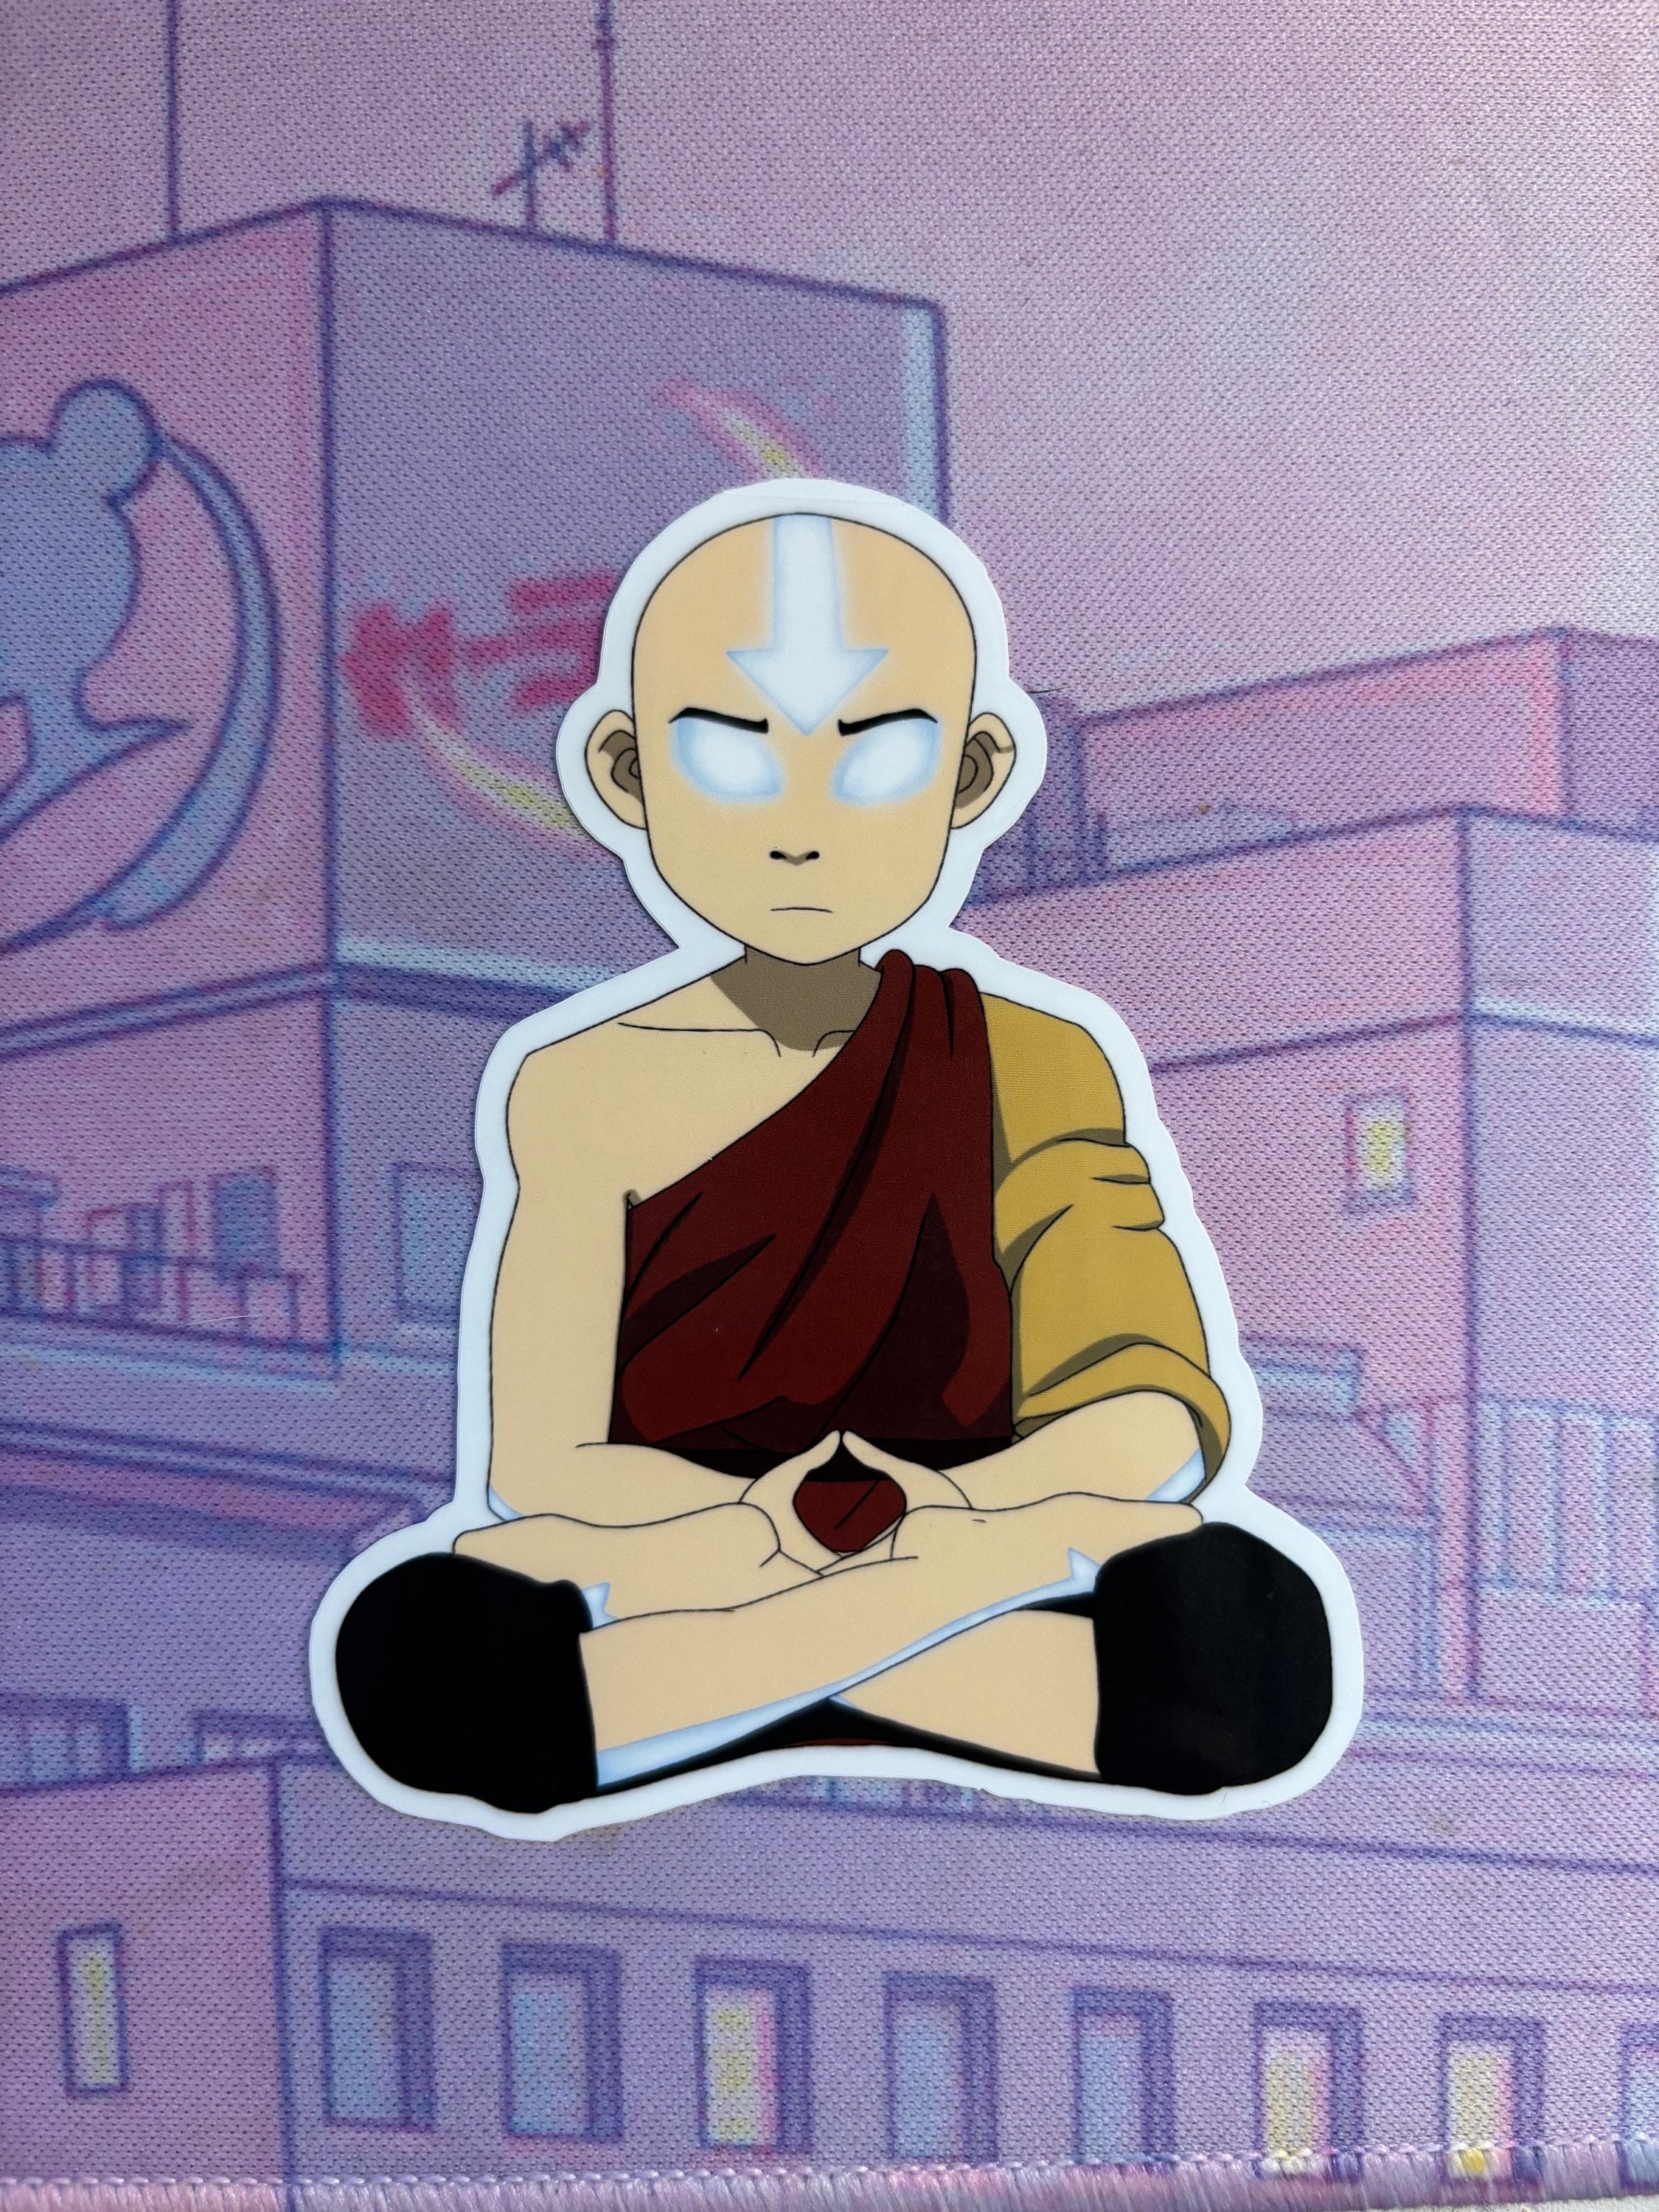 Avatar Last Airbender Stickers Vinyl Decals Bomb Gaming Gamer Anime Pack  50pc